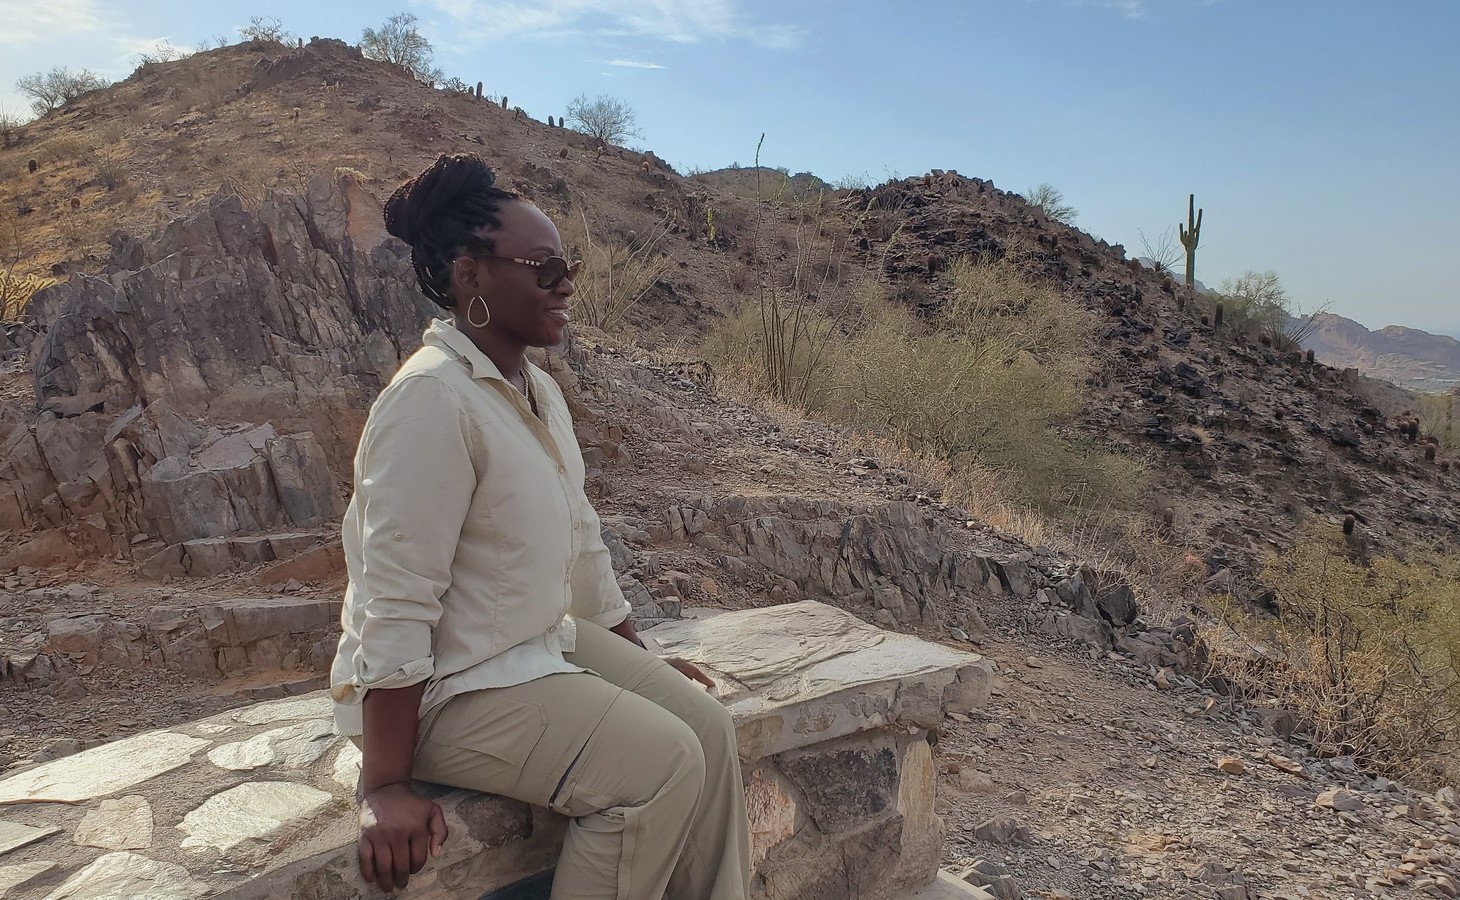 While taking a break on a bench during one of the Phoenix hiking tours from the Wild Bunch Desert Guides, a woman has time for private contemplation while enjoying another unforgettable view of the Sonoran Desert.